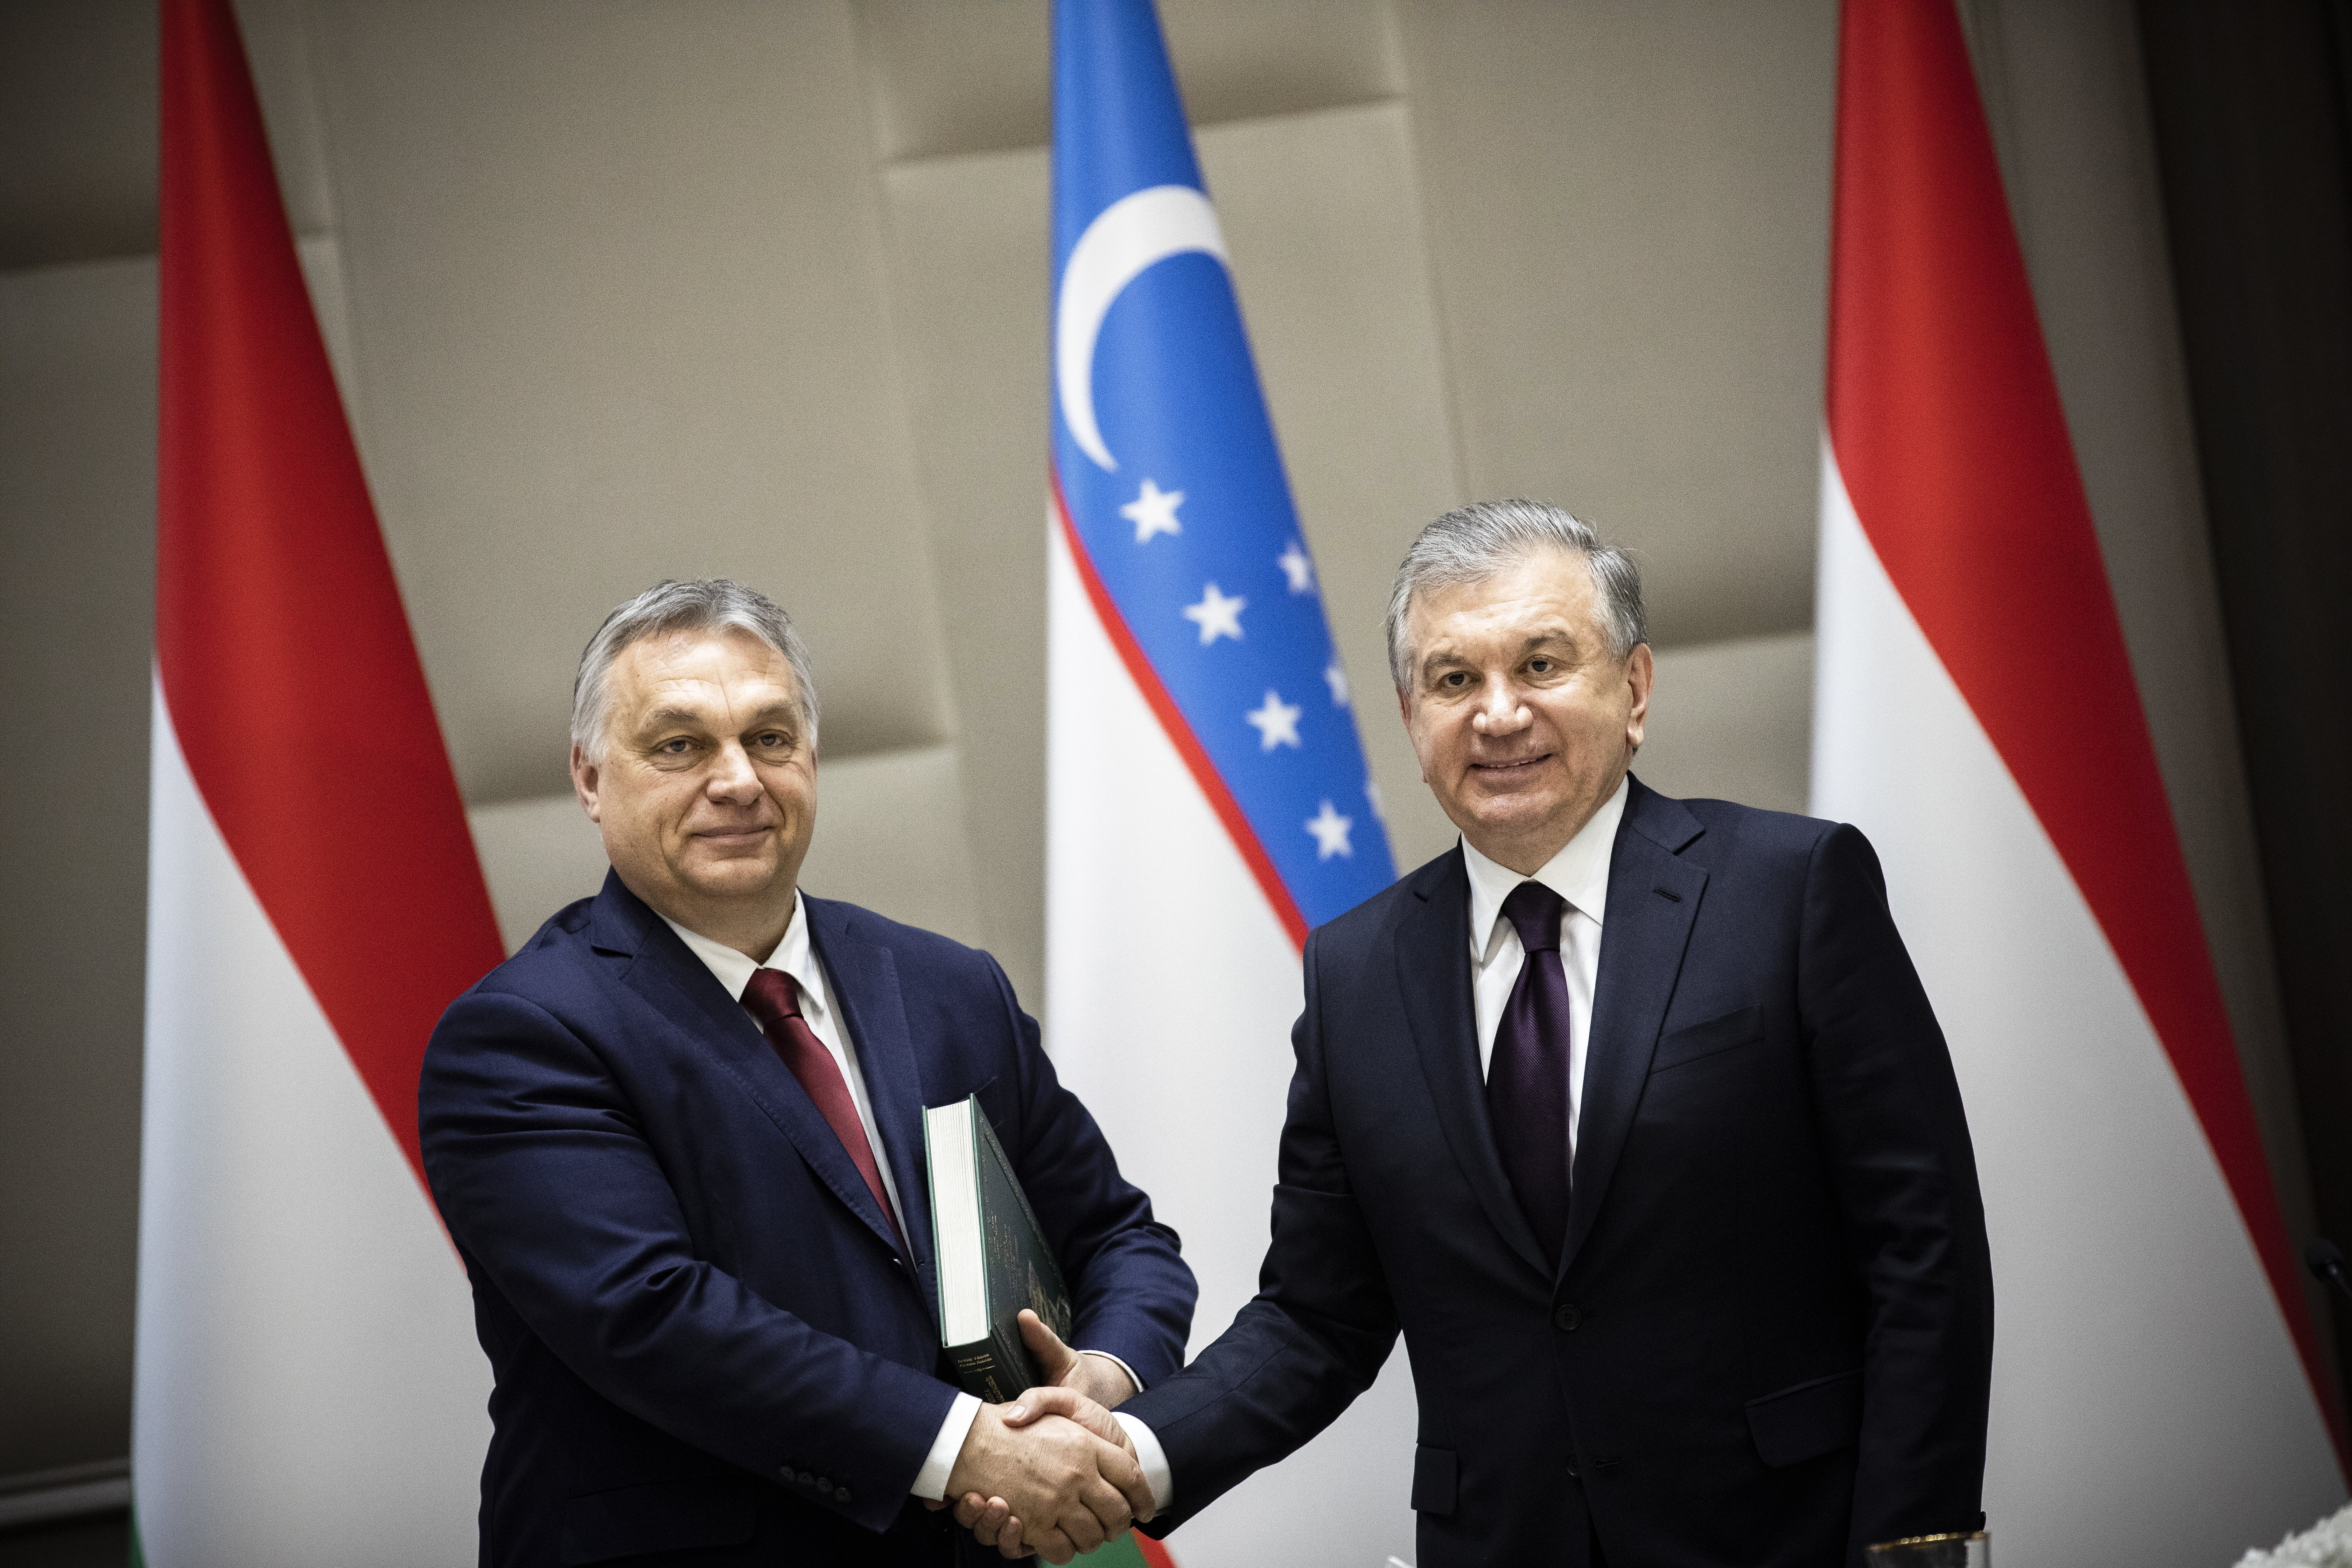 PM Orban agrees with Uzbek President to further bilateral ties